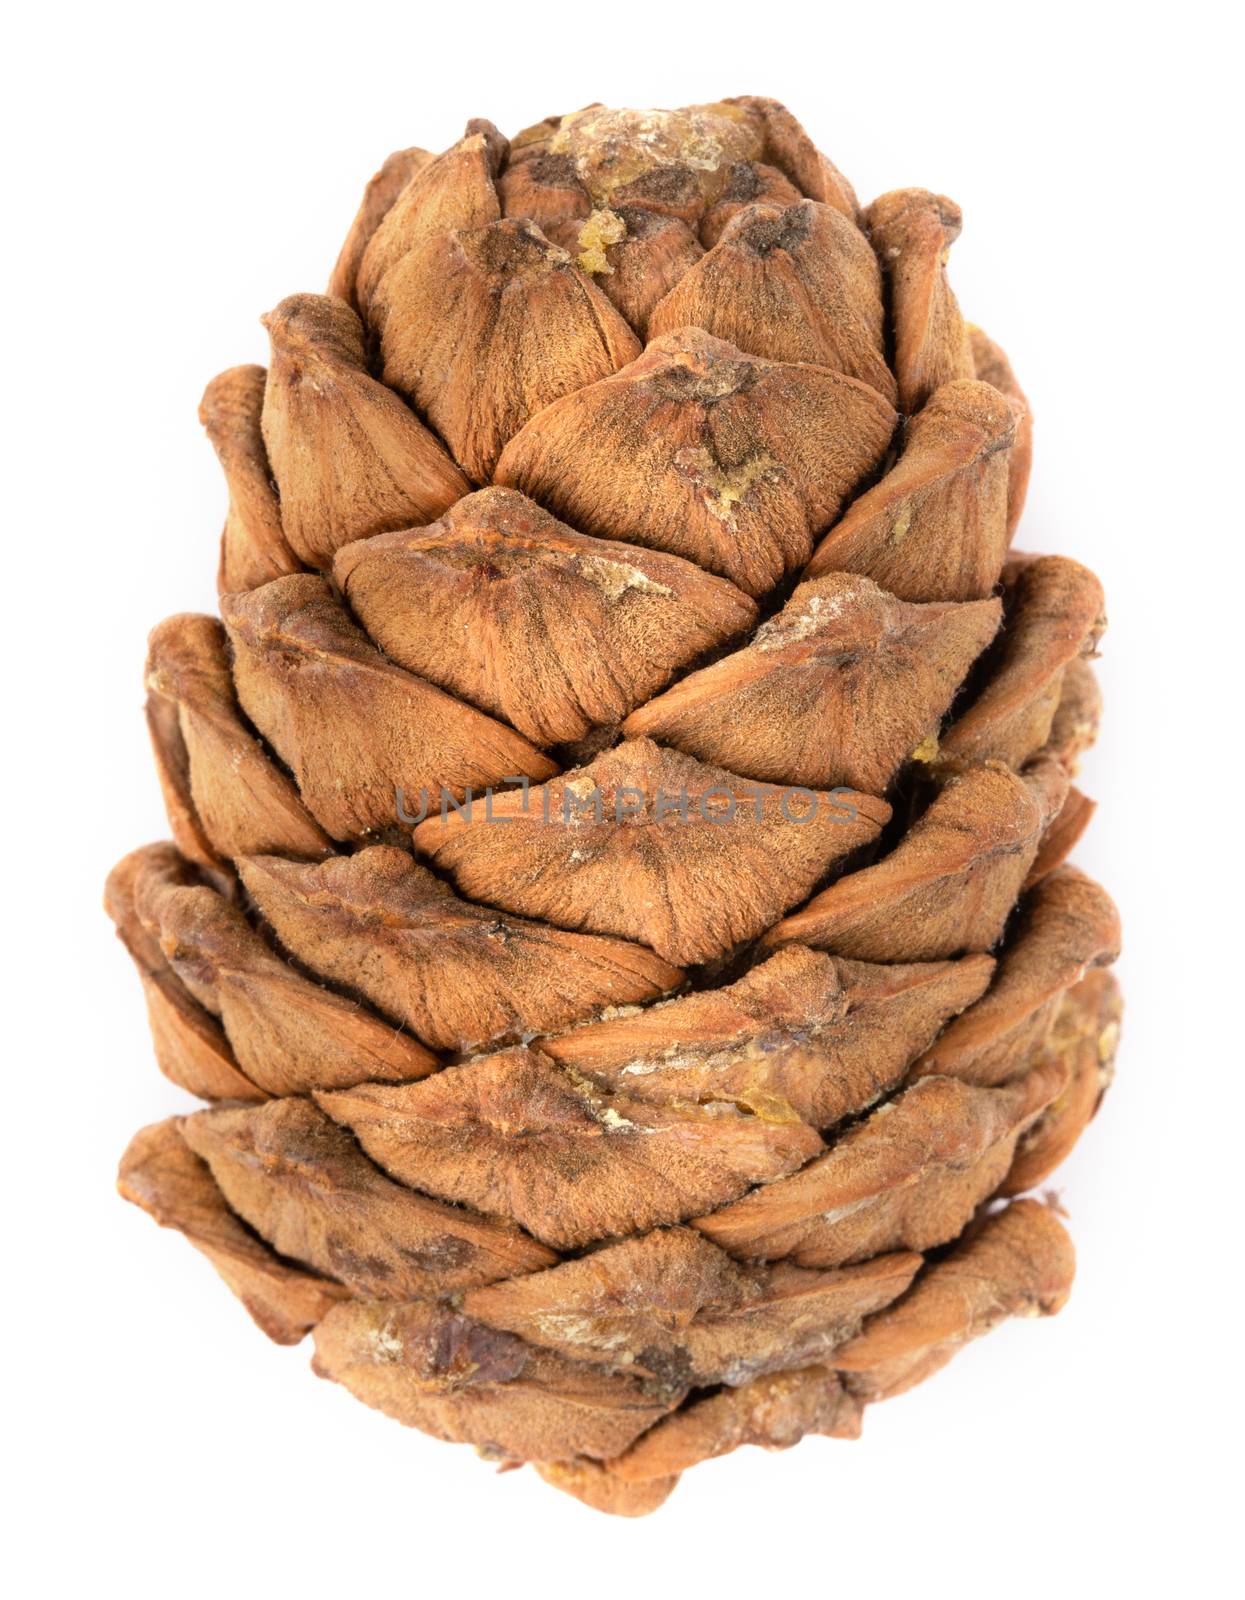 Cedar cone on a white background by 25ehaag6